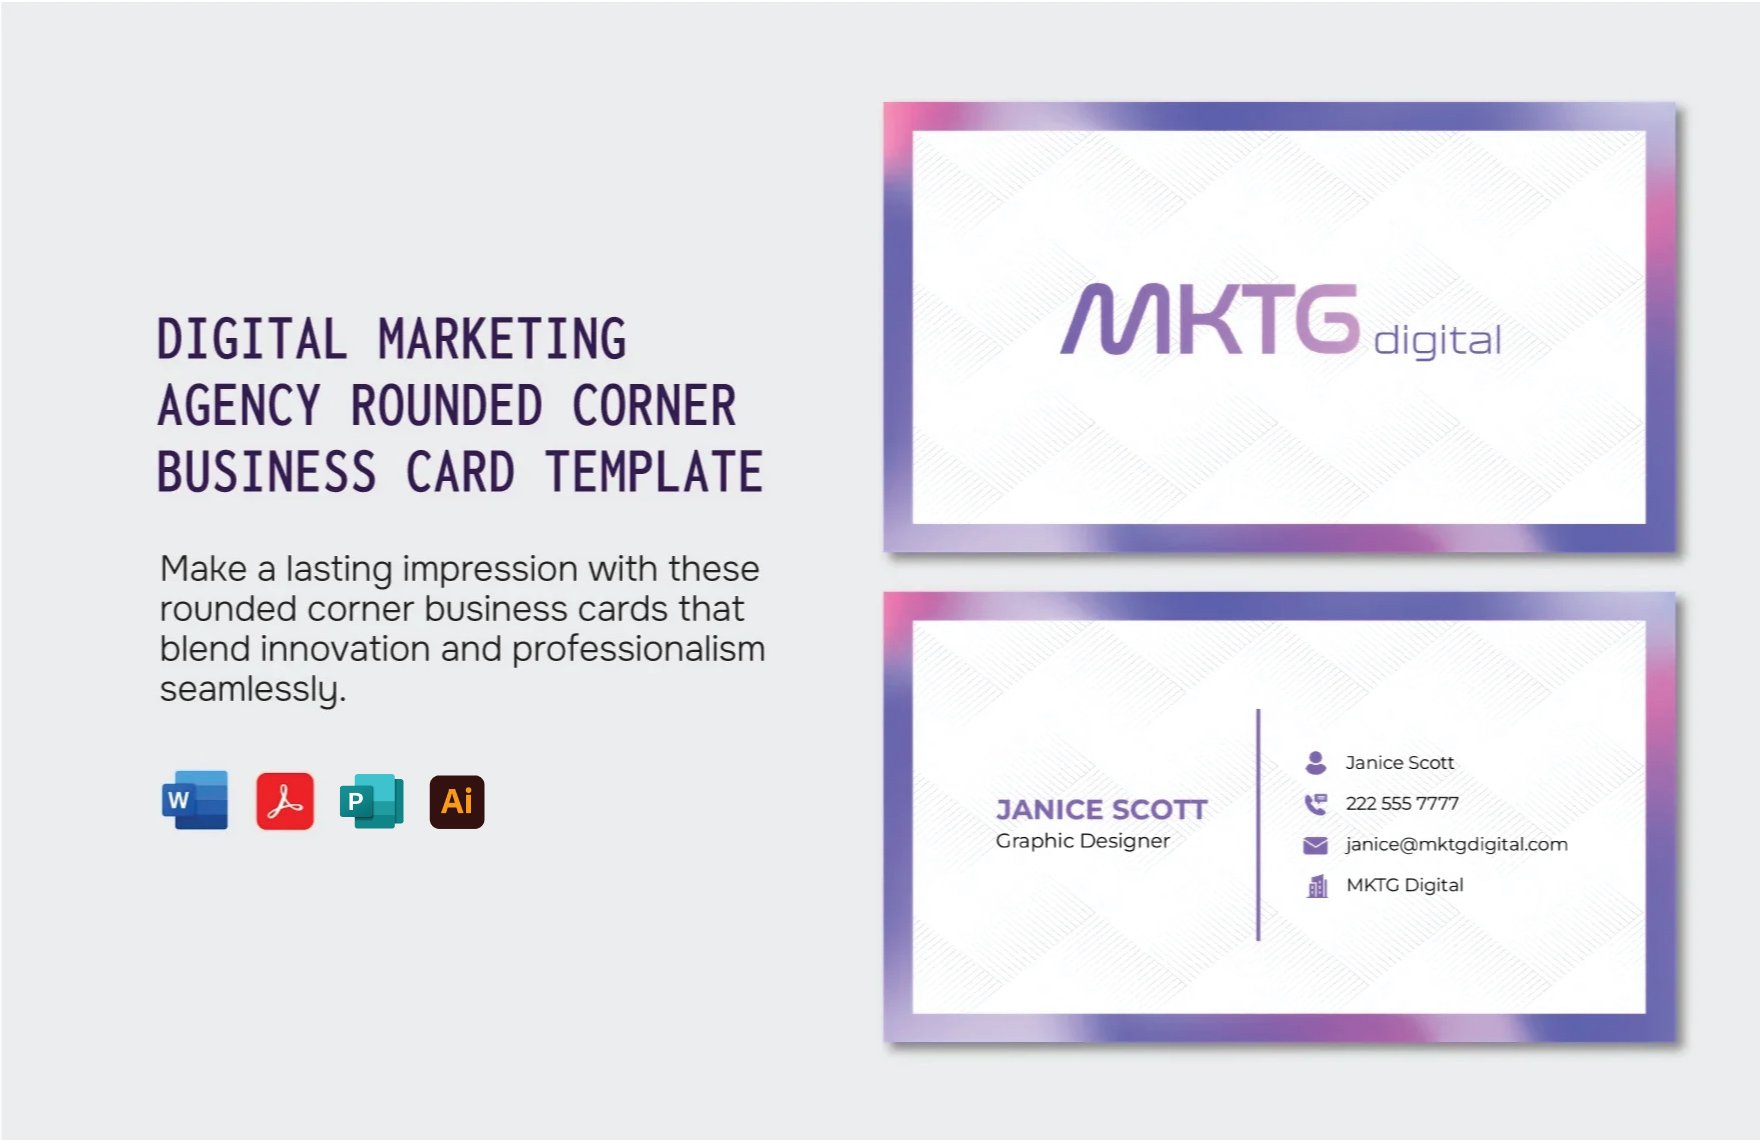 Digital Marketing Agency Rounded Corner Business Card Template